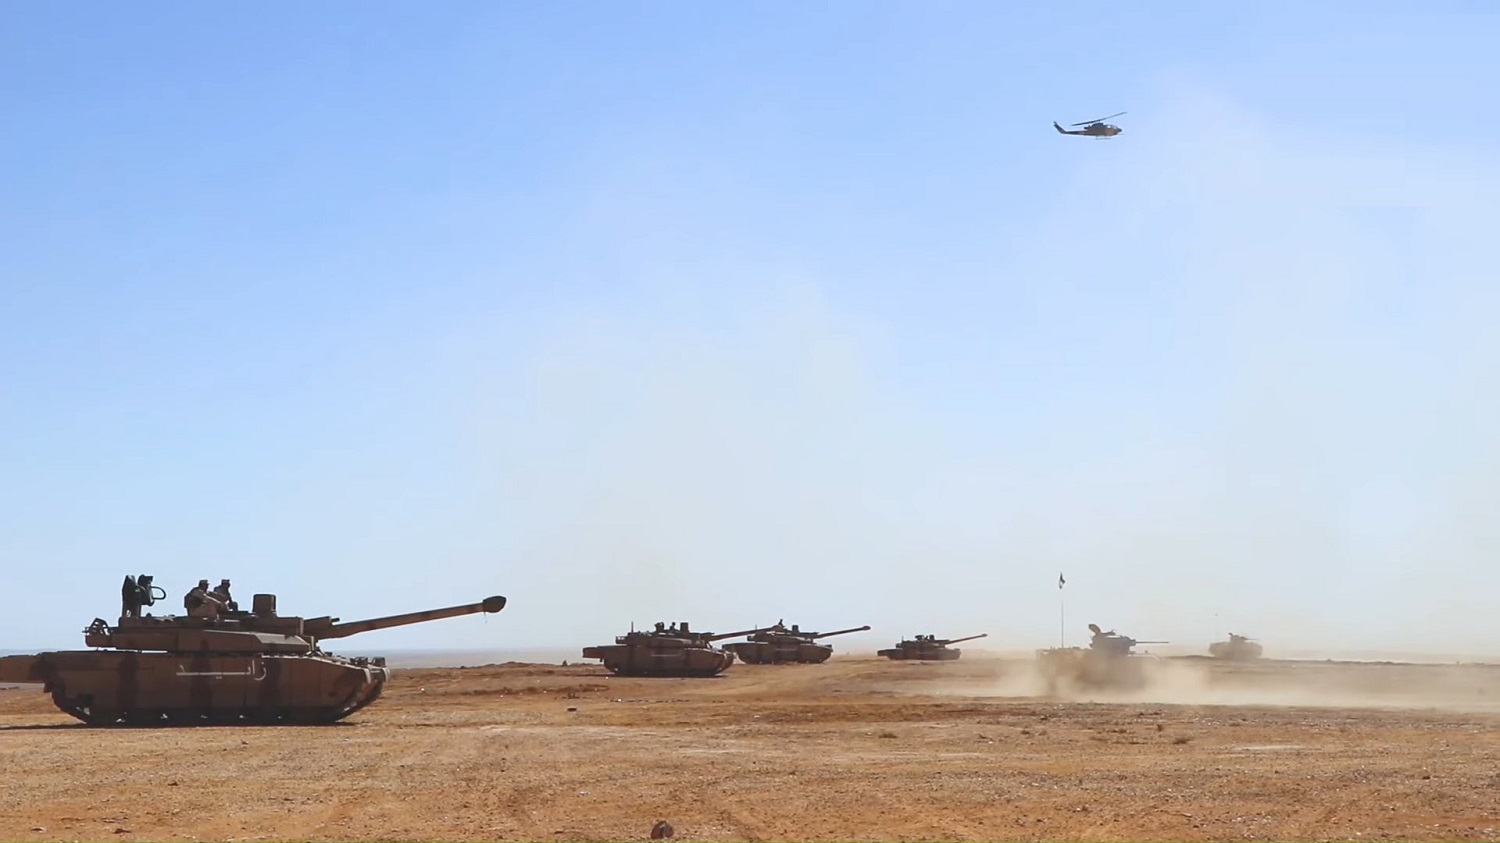 Jordan Army Deploys for the First Time Leclerc Tanks During Military Exercise